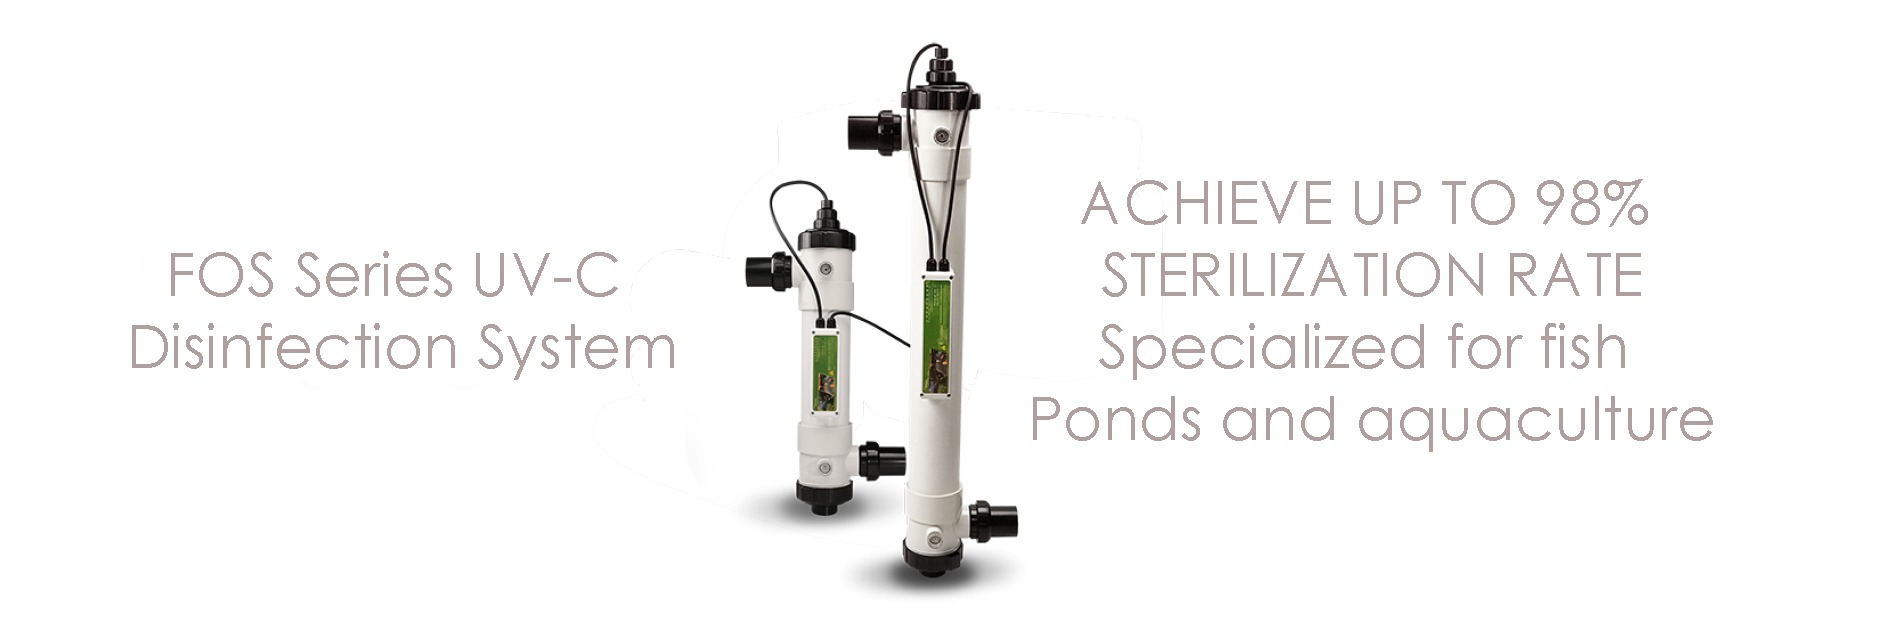 FOS Series UV-C Disinfection System